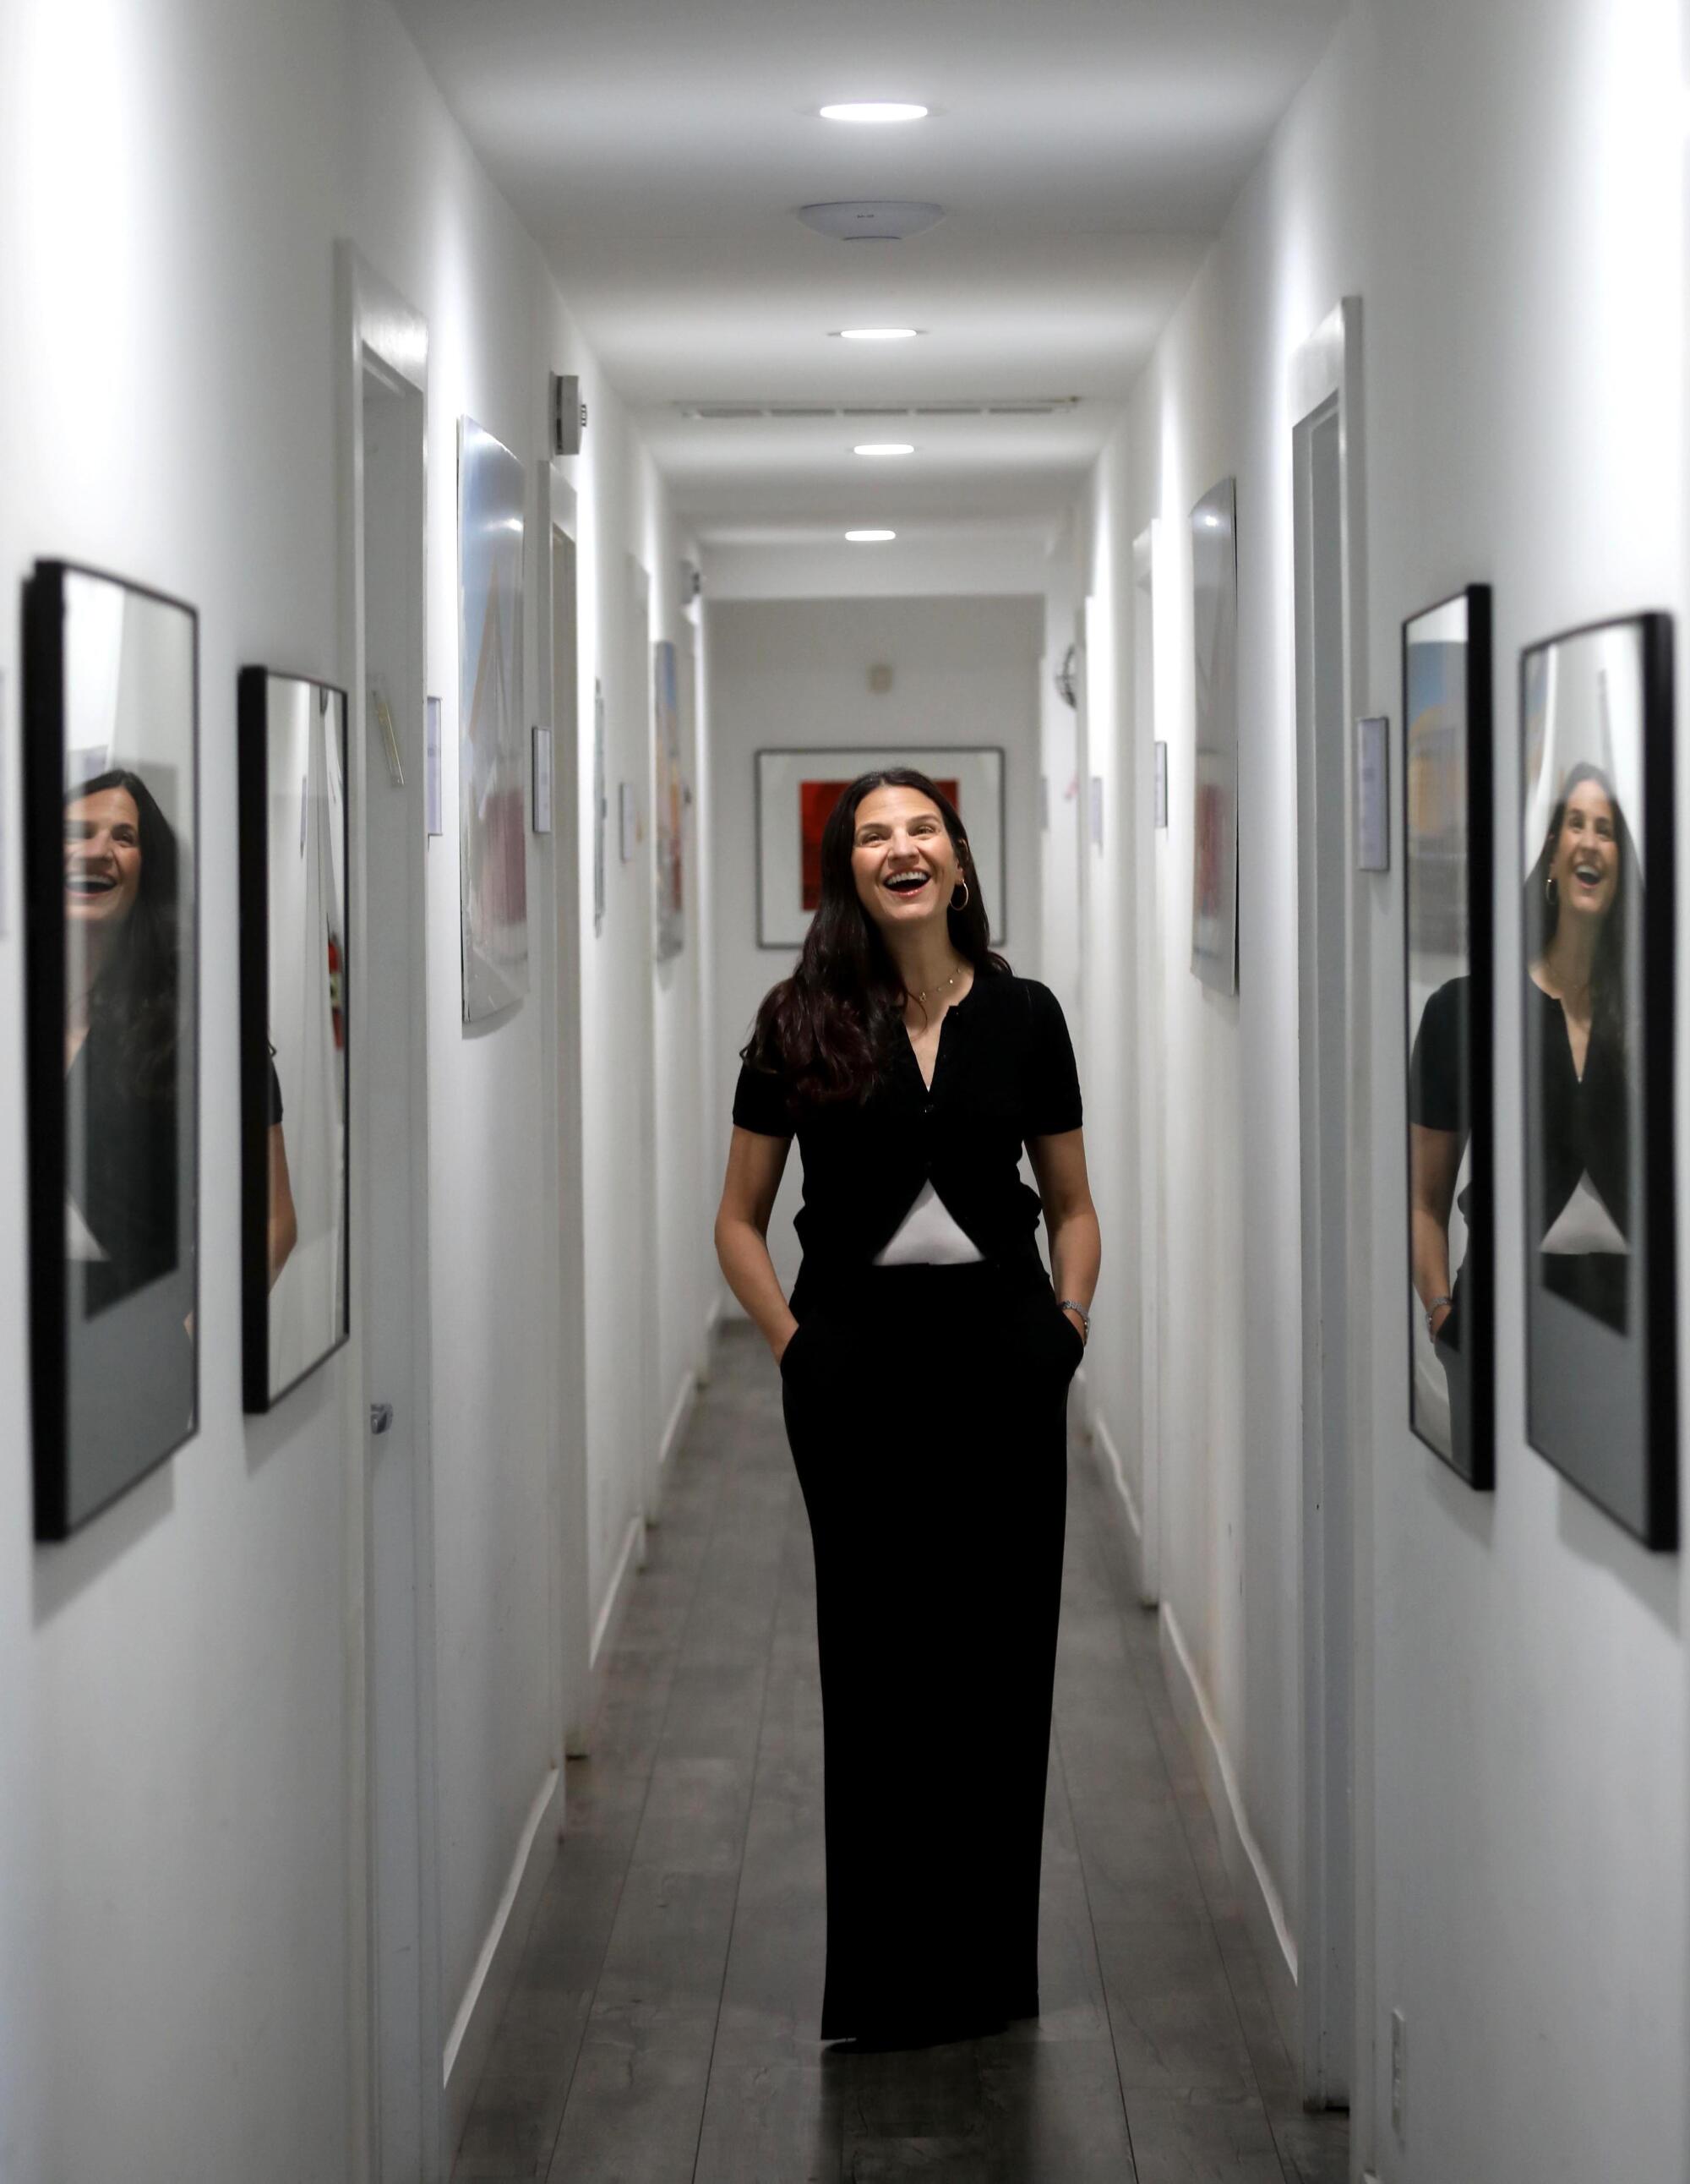 A woman stands in a corridor, her face reflected in the glass of large frames on the wall